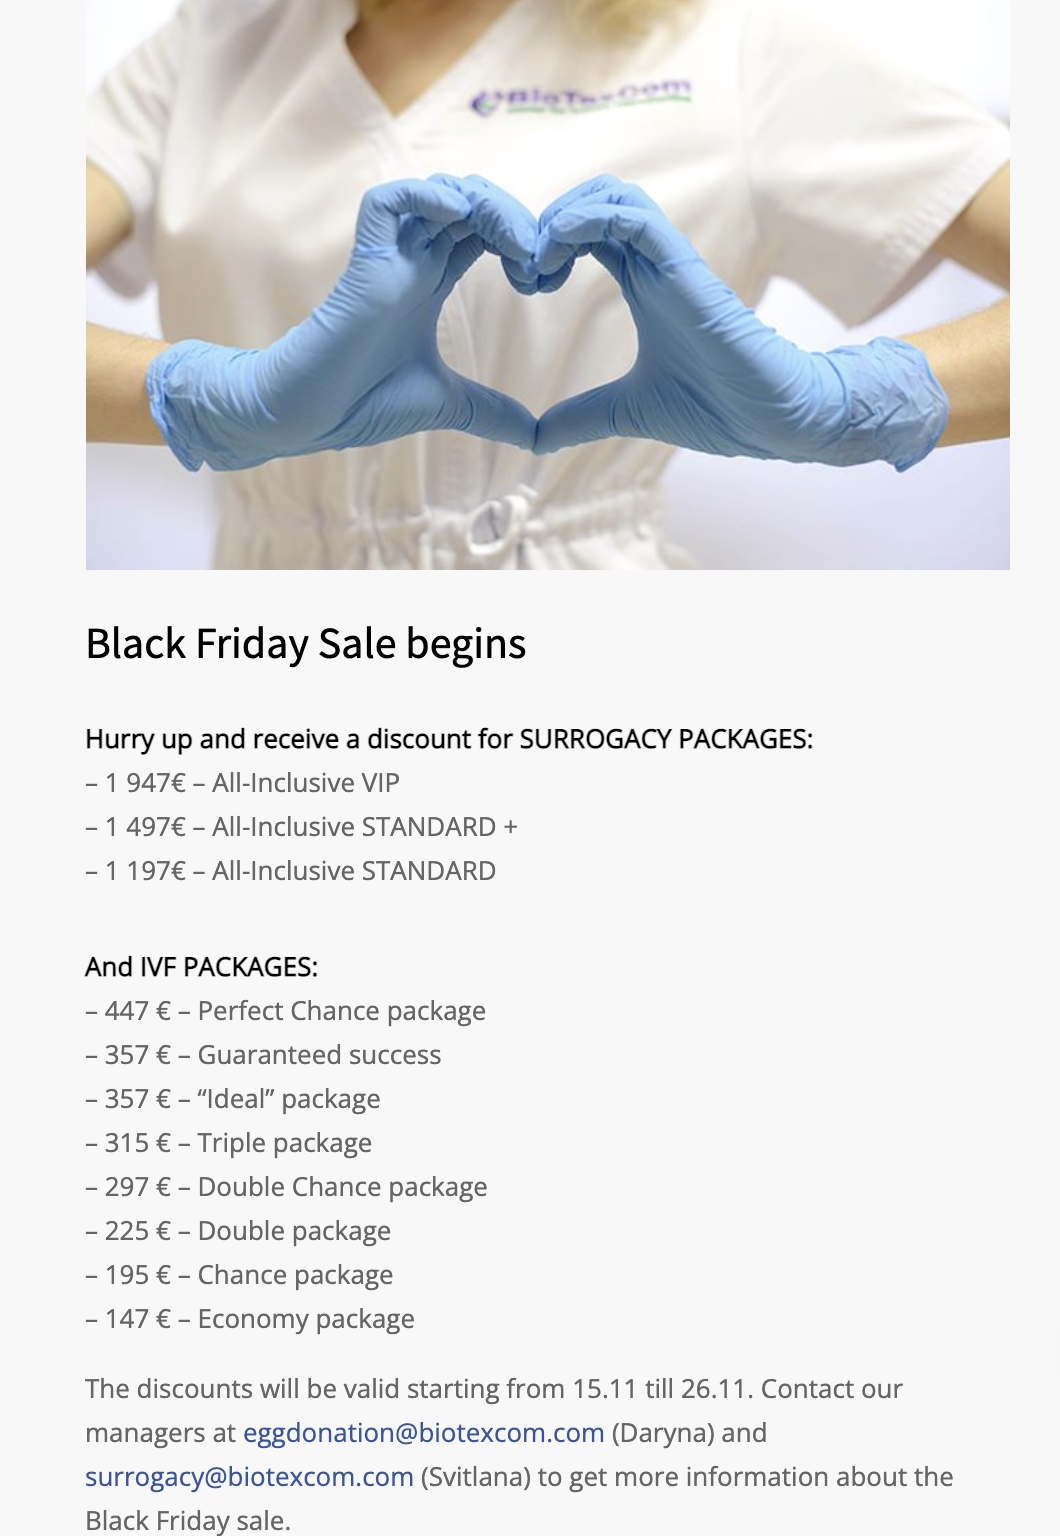 ‘How low can we go?’: Fertility clinic offers Black Friday sale on human beings